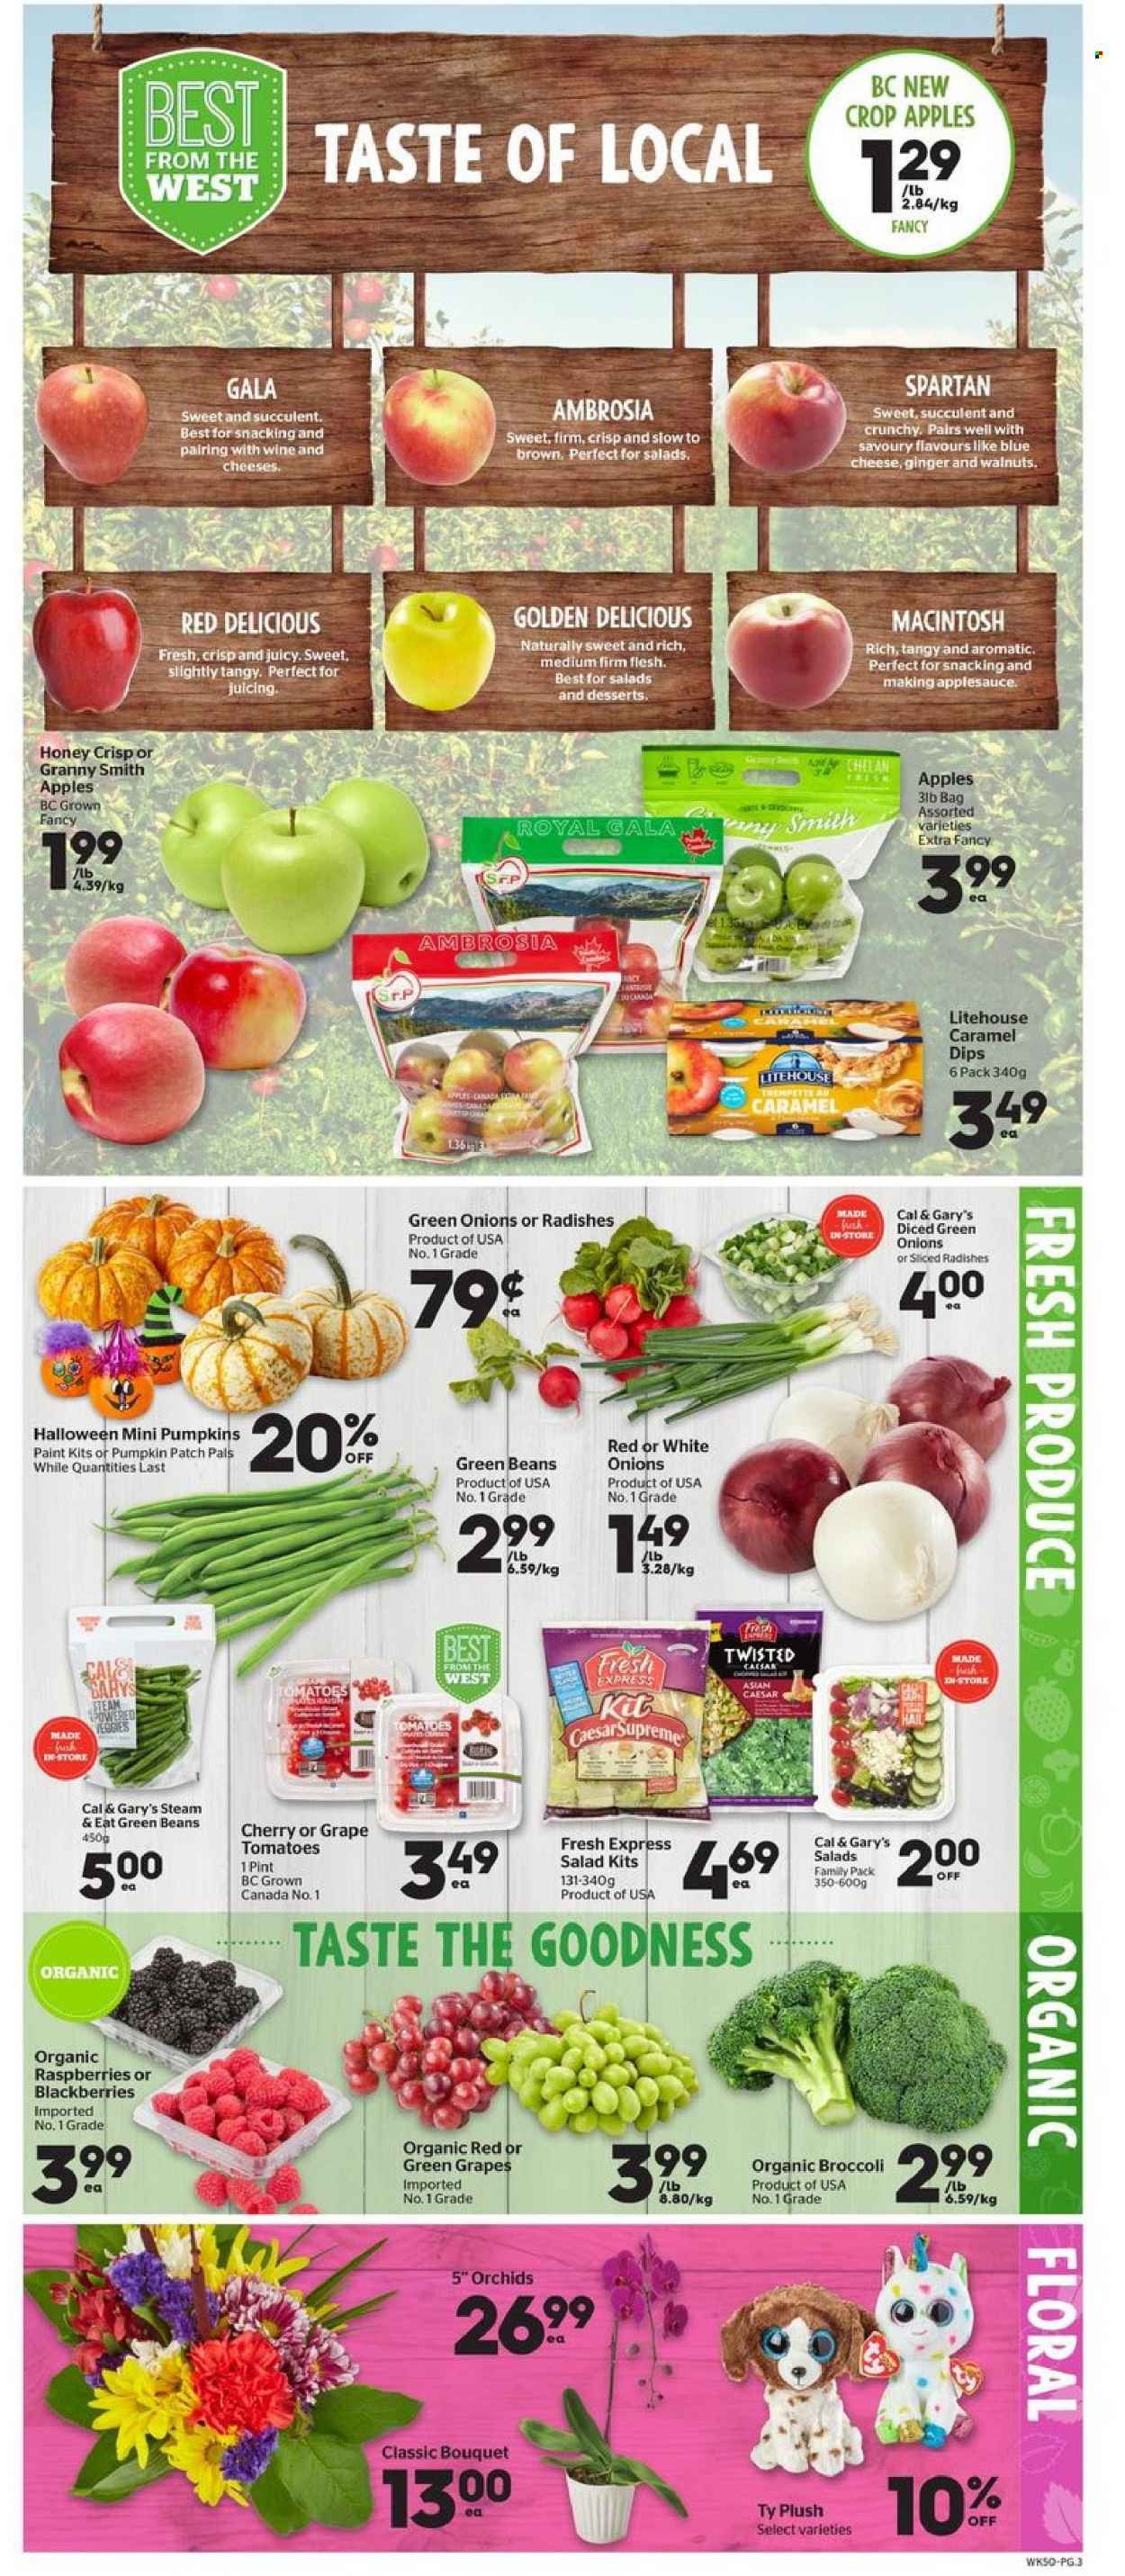 thumbnail - Calgary Co-op Flyer - October 14, 2021 - October 20, 2021 - Sales products - beans, broccoli, ginger, green beans, radishes, tomatoes, pumpkin, salad, green onion, Gala, Red Delicious apples, cherries, Golden Delicious, Granny Smith, blue cheese, cheese, caramel, apple sauce, honey, walnuts, wine. Page 3.